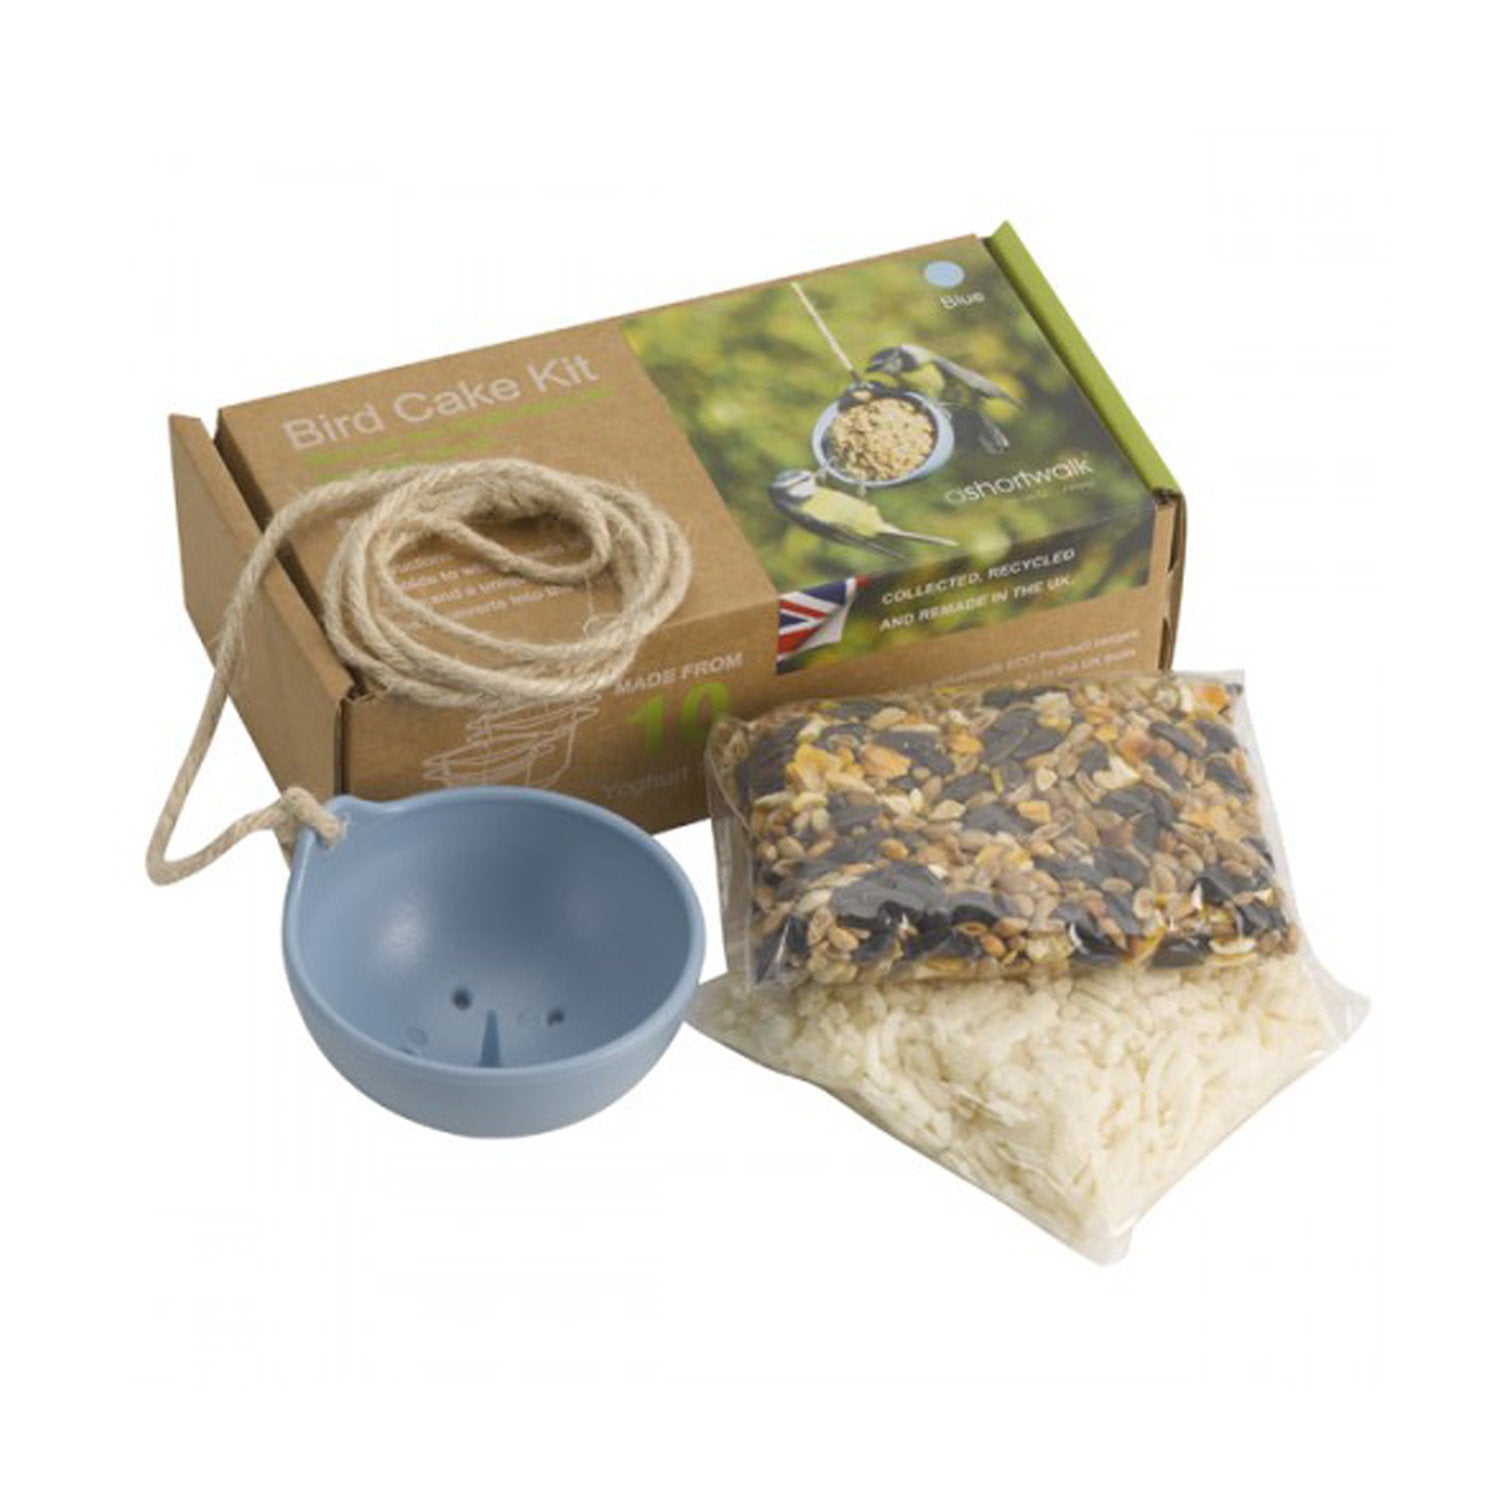 Bird Care Kit - Made from Recycled Yoghurt Pots